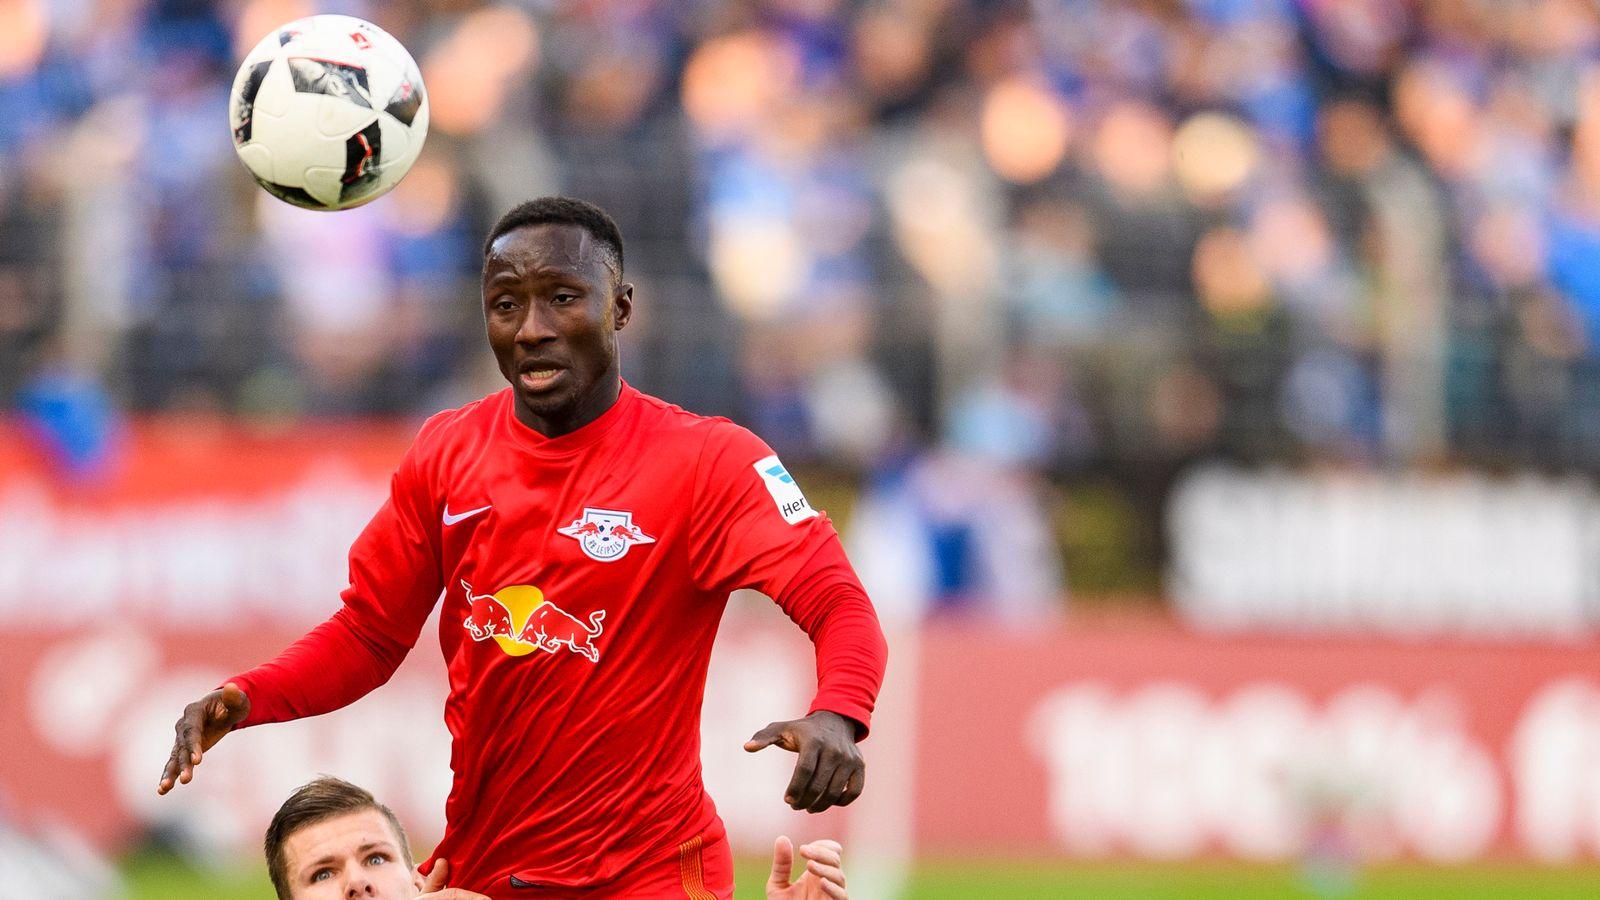 Liverpool end pursuit to sign Naby Keita from RB Leipzig